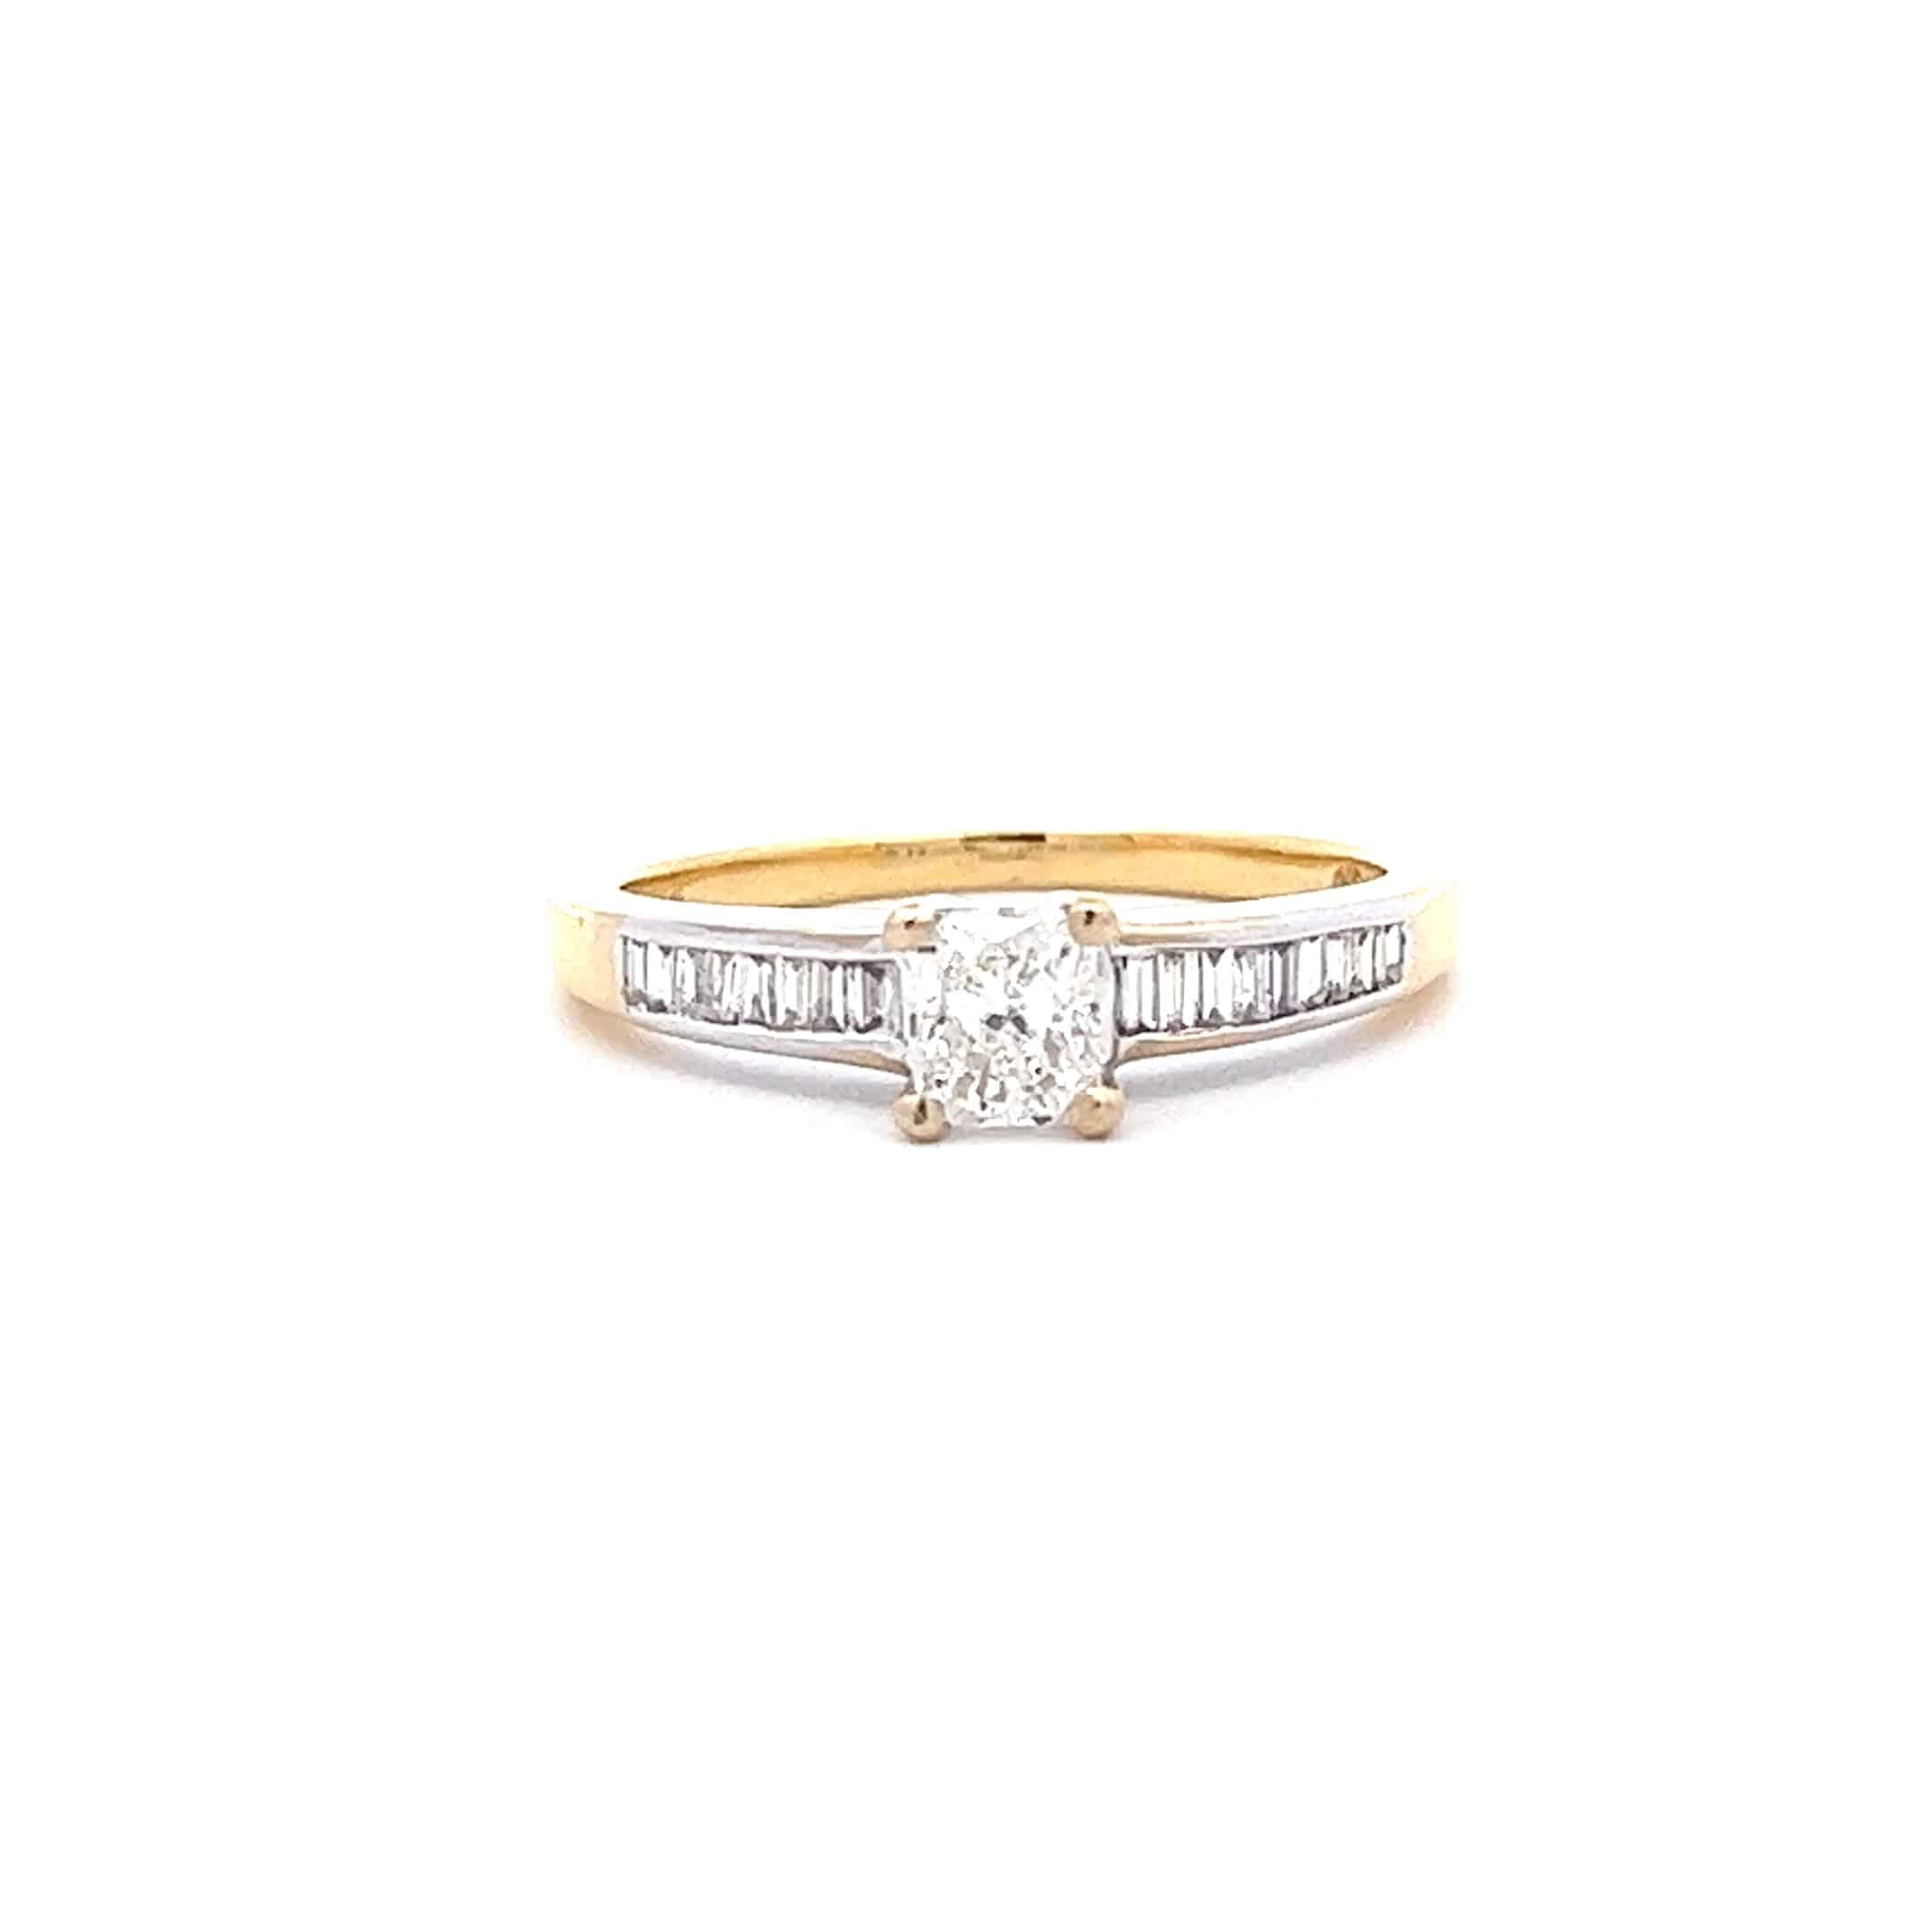 http://13.42.249.223/product/radiant-cut-diamond-ring-with-baguette-cut-diamond-shoulders-pre-owned/